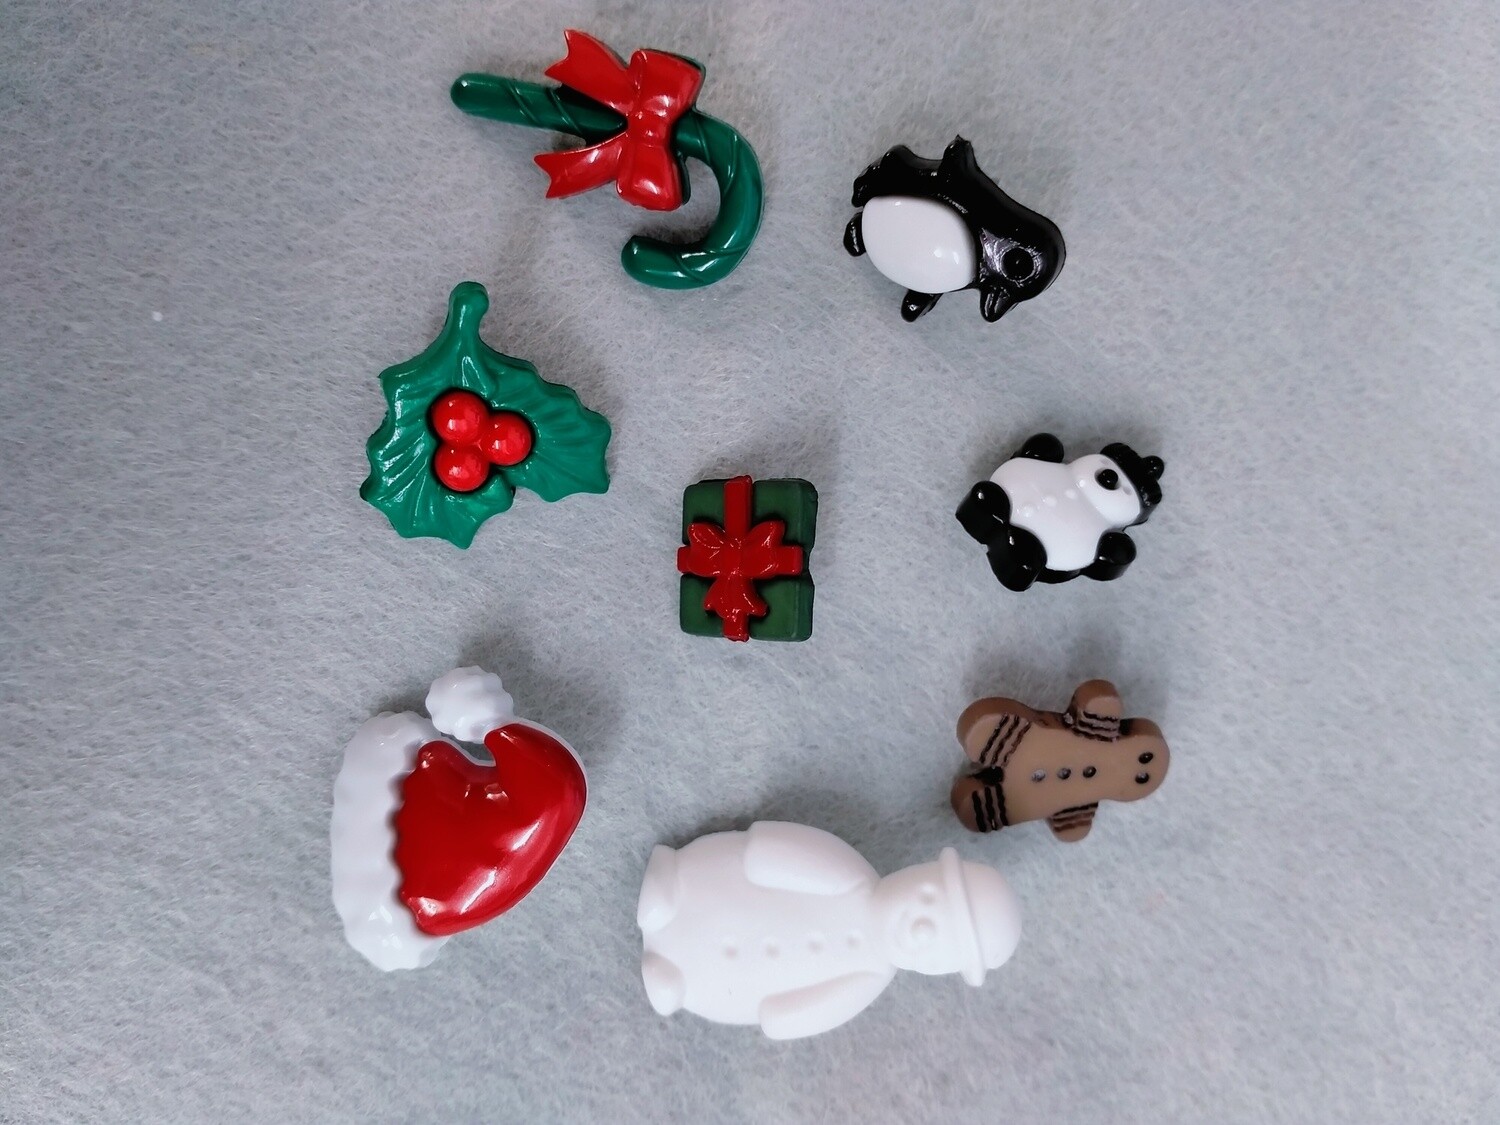 Assorted Christmas Buttons